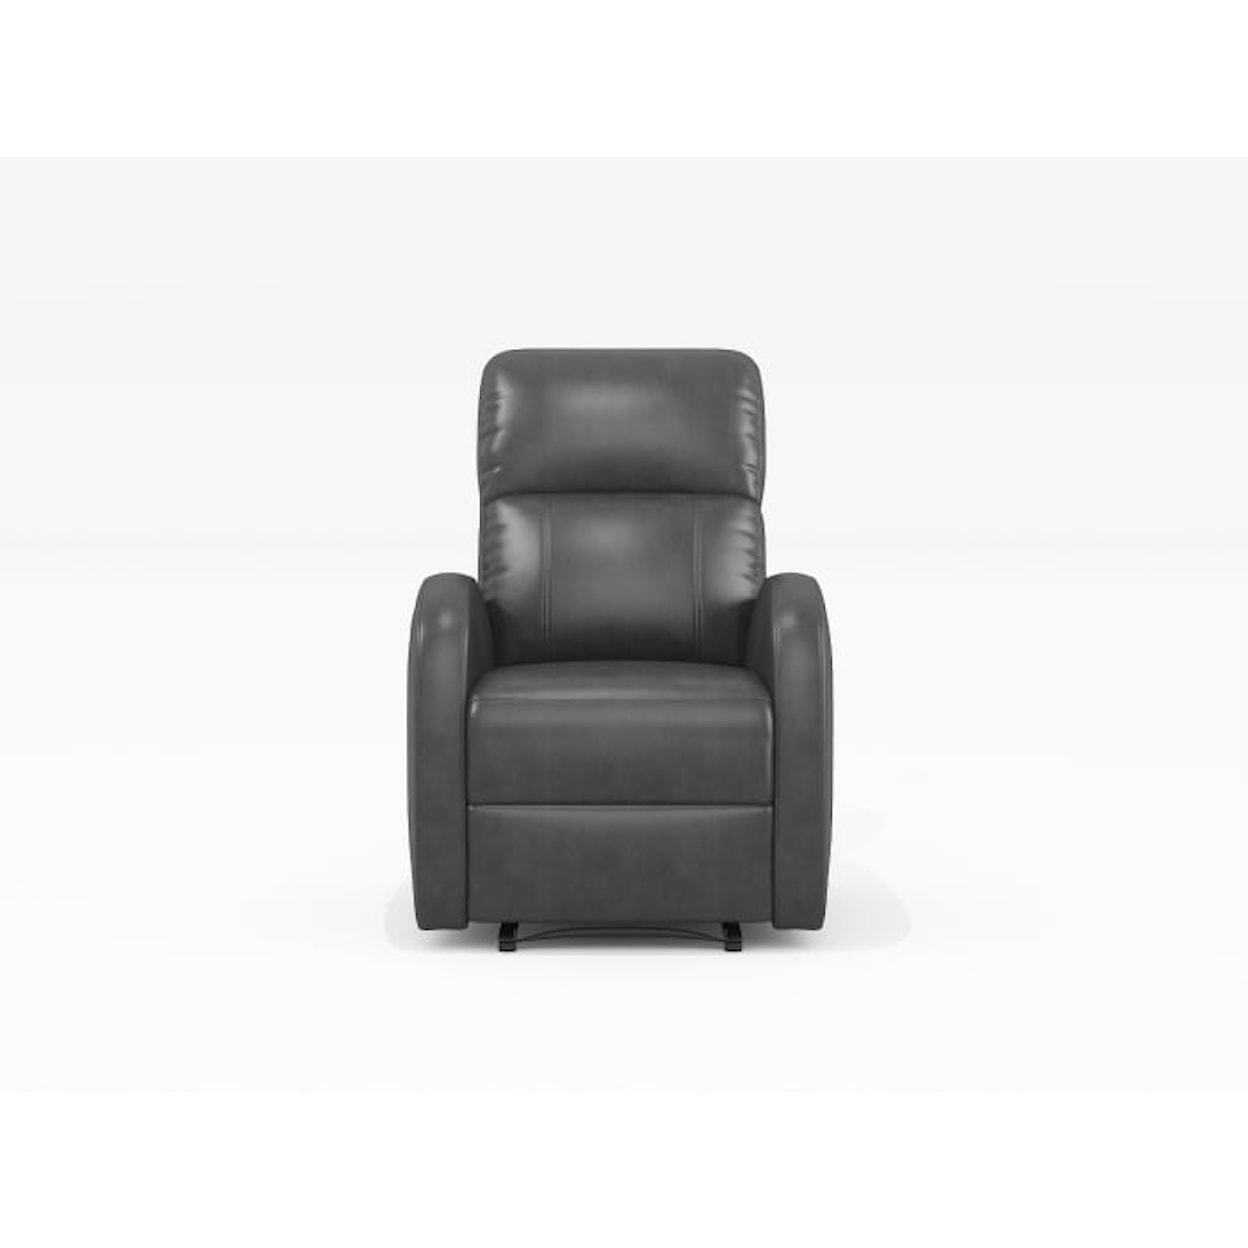 Homelegance Furniture Wiley Power Reclining Chair